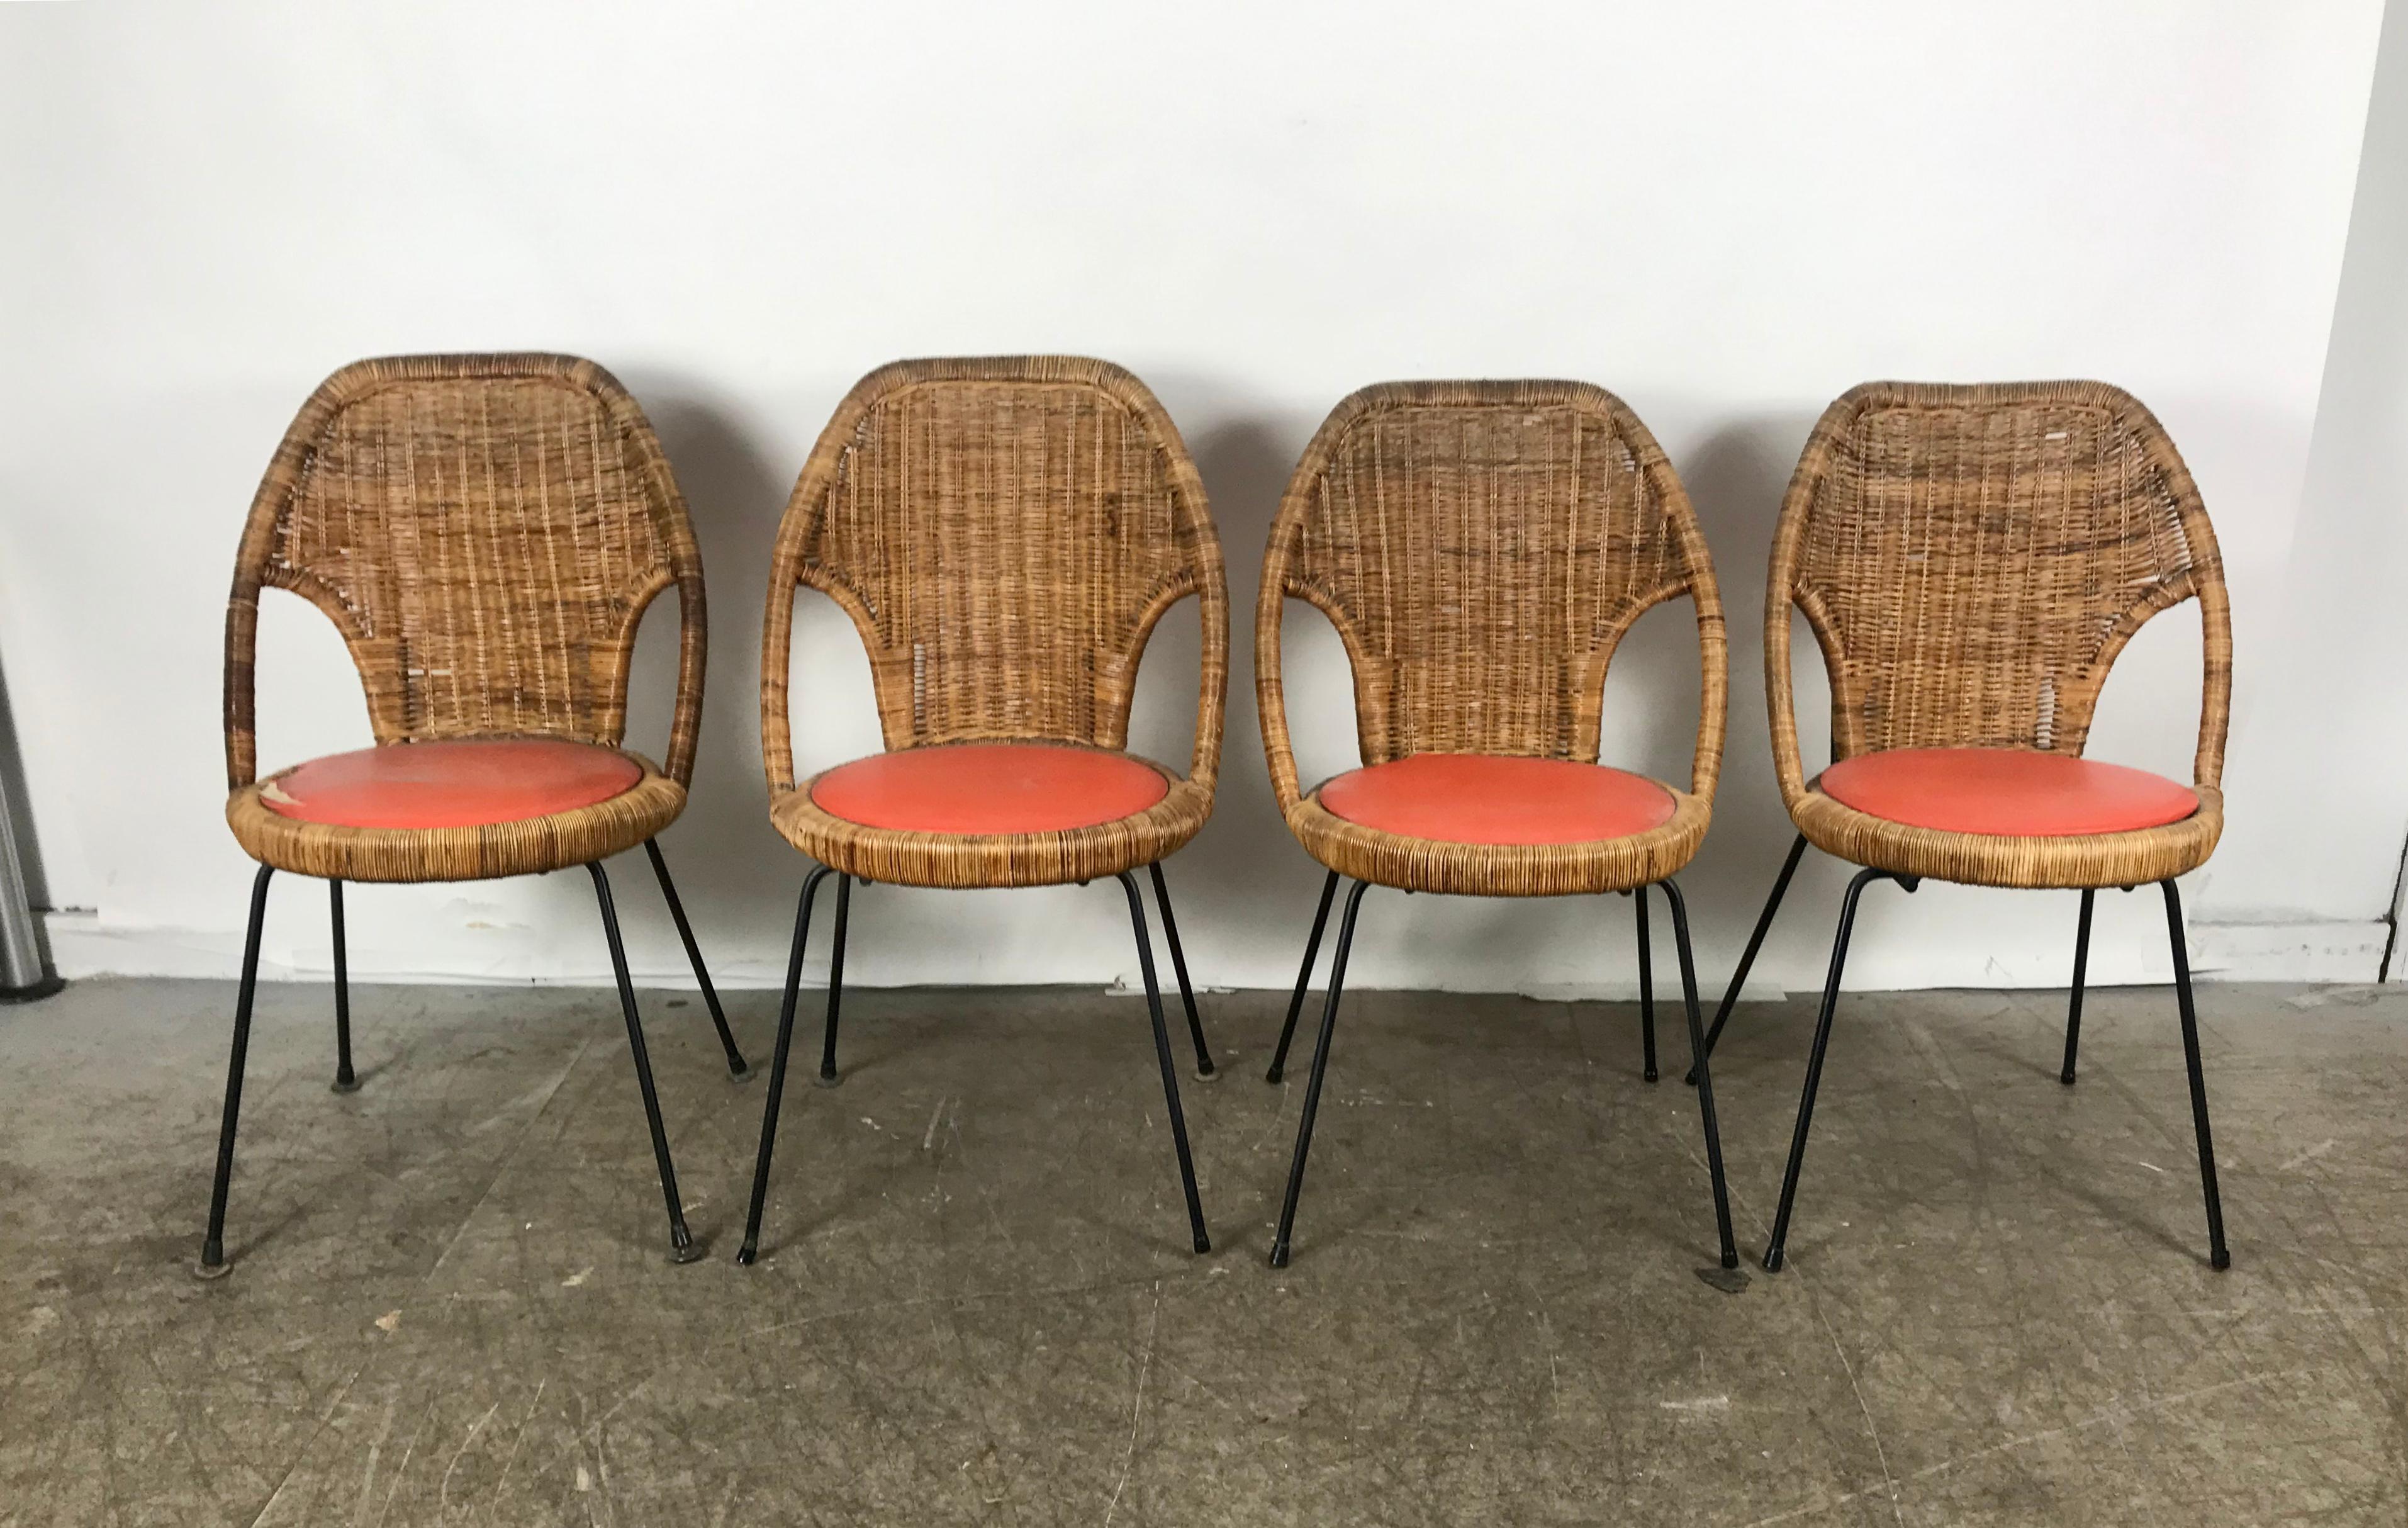 20th Century Danny Ho Fong, Wicker and Iron Dinette Chairs for Tropical